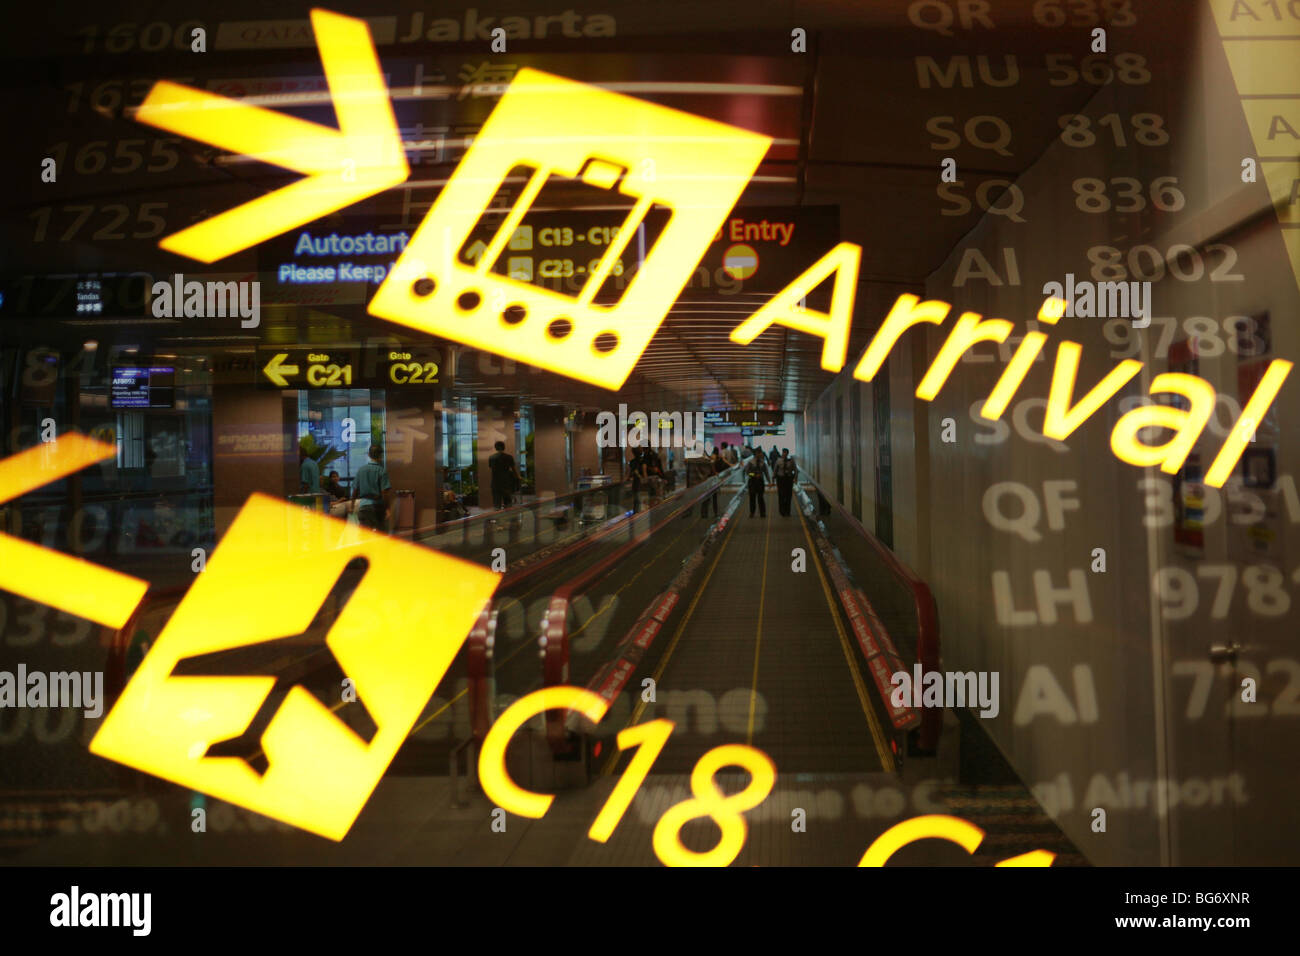 Arrival Sign in airport Stock Photo